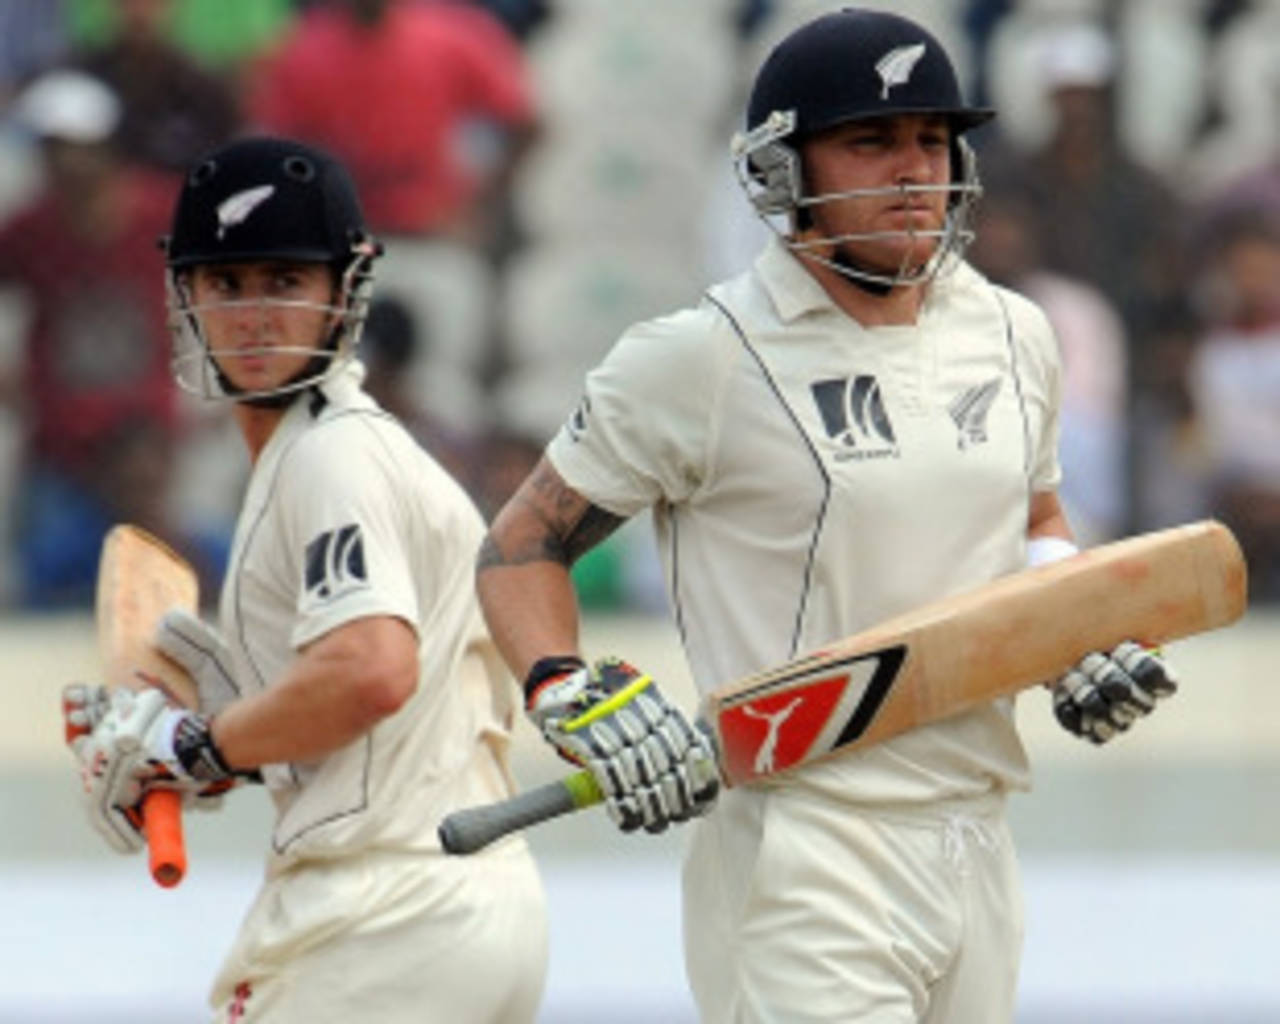 Brendon McCullum and Kane Williamson run between the wickets, India v New Zealand, 2nd Test, Hyderabad, 5th day, November 16, 2010